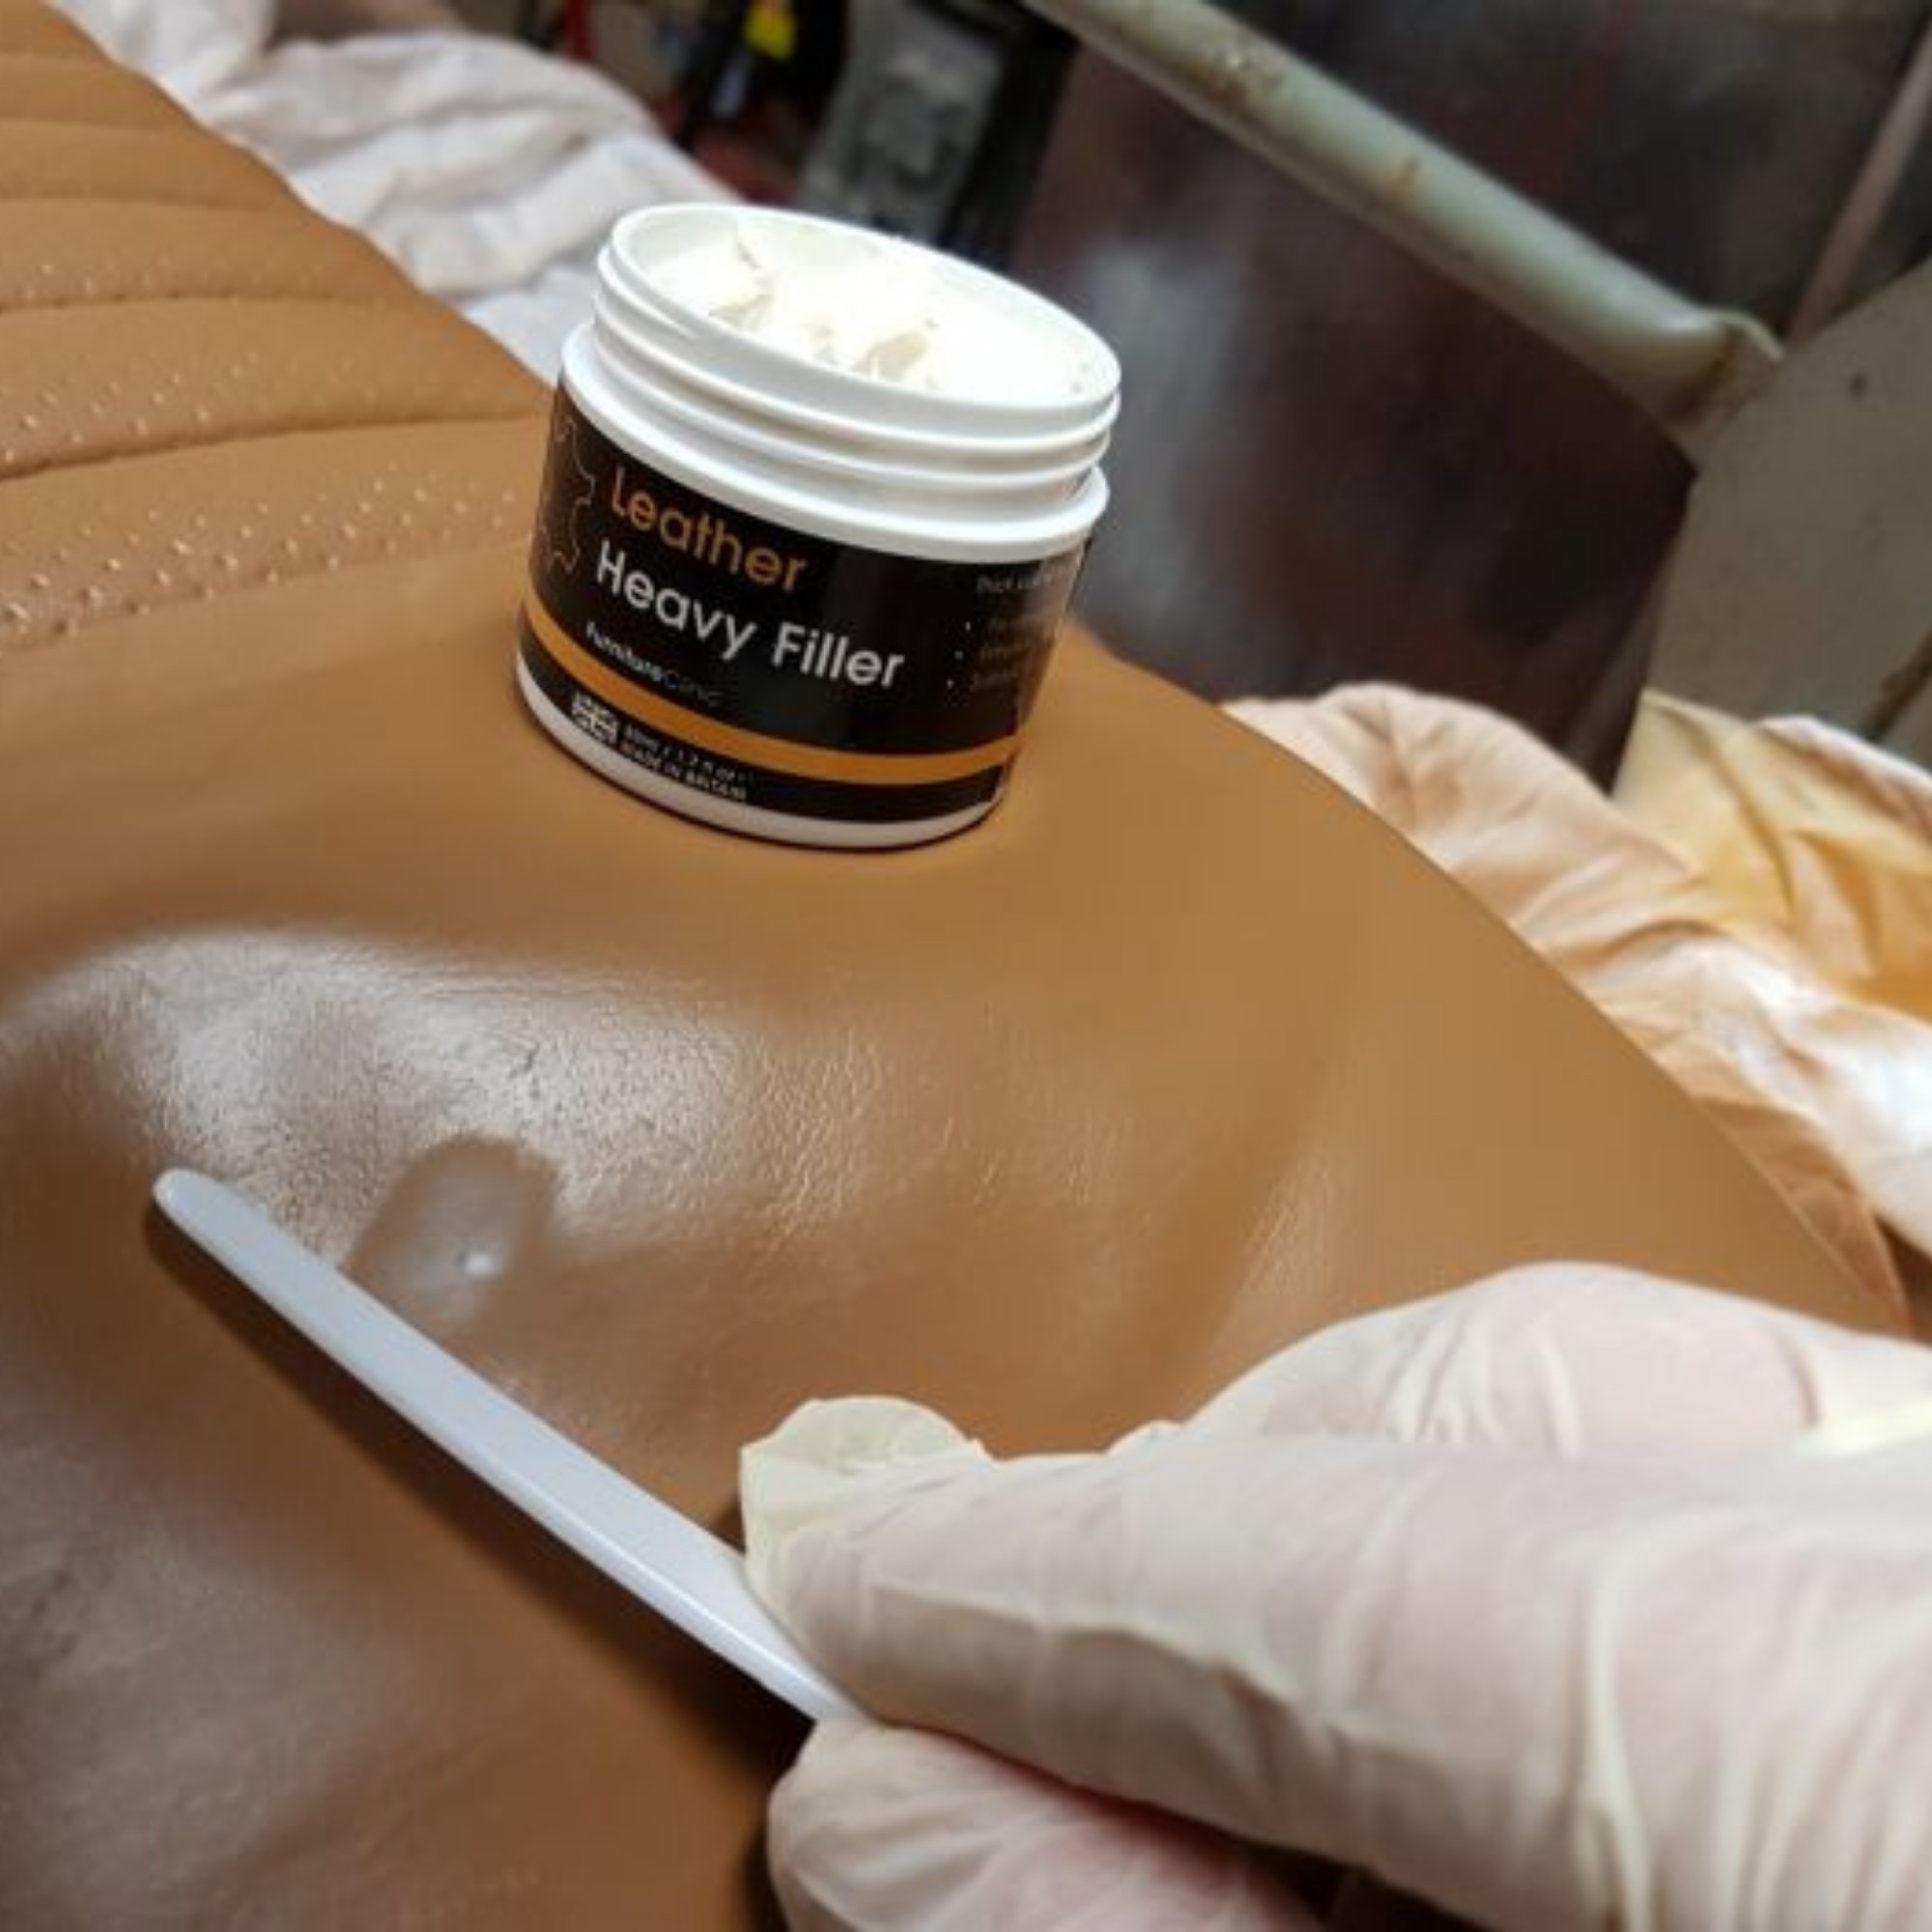 Furniture Clinic on X: Easily repair scuffs, scratches and holes in all  types of leather with our Heavy Filler. Our leather repair filler is  extremely flexible, making it perfect for high-use areas